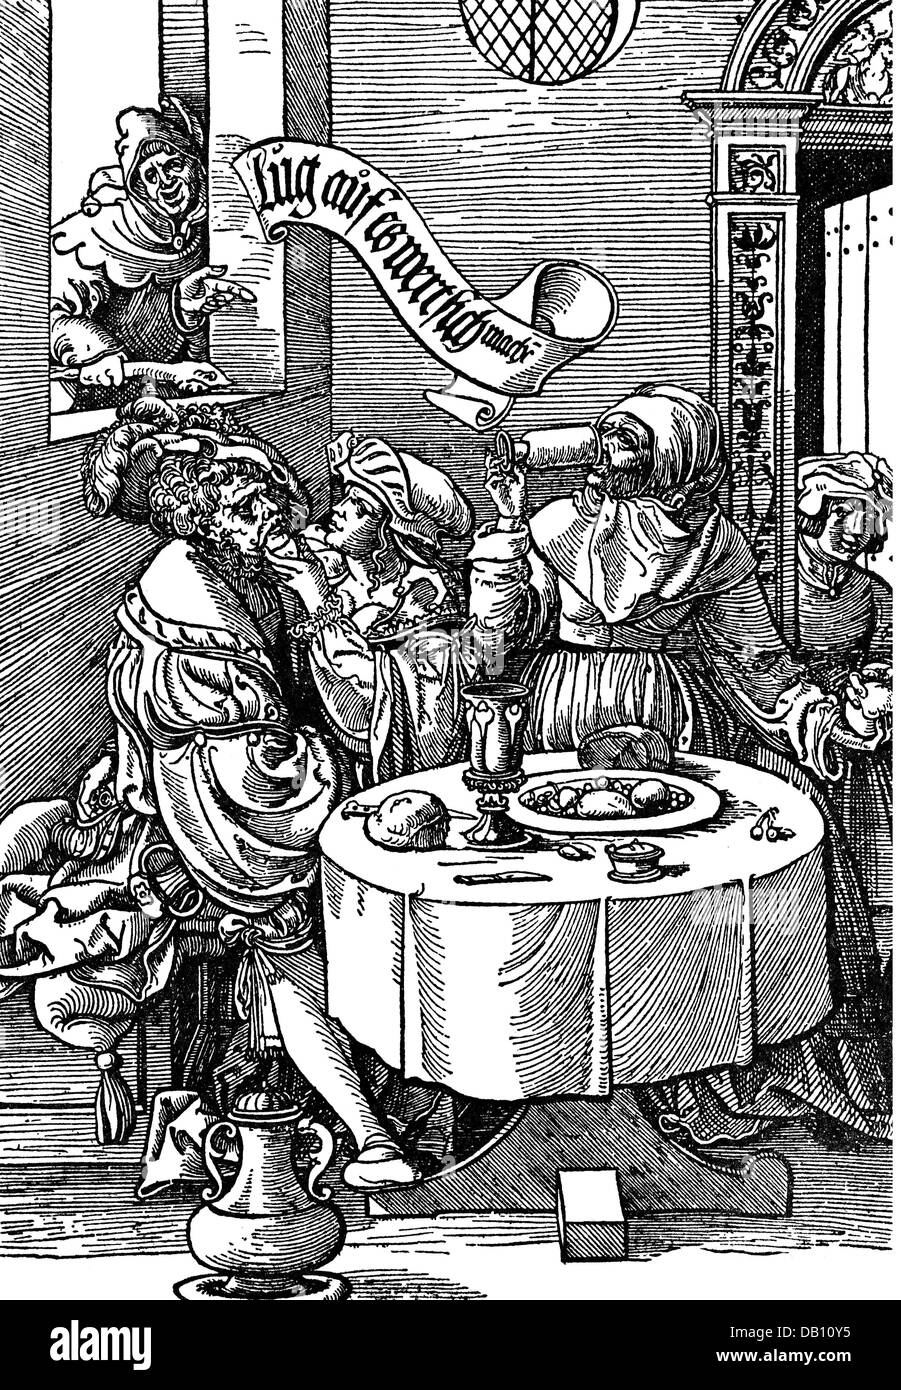 gastronomy,inns,scene at a tavern,woodcut,Augsburg,early 16th century,16th century,graphic,graphics,inns,bar,bars,pub room,table,tables,table cloth,tablecloth,table cloths,tablecloths,plate,plates,mug,cup,mugs,cups,guest,guests,sitting,sit,clothes,outfit,outfits,hat,hats,beret,berets,feather,feathers,beard,beards,doublet,jerkin,knee breeches,carafe,decanter,decanters,seduction,seductions,seduce,seducing,drinking,drink,thefts,grand theft,thieving,thieve,stealing,steal,deception,deceive,deceiving,trick,,Additional-Rights-Clearences-Not Available Stock Photo